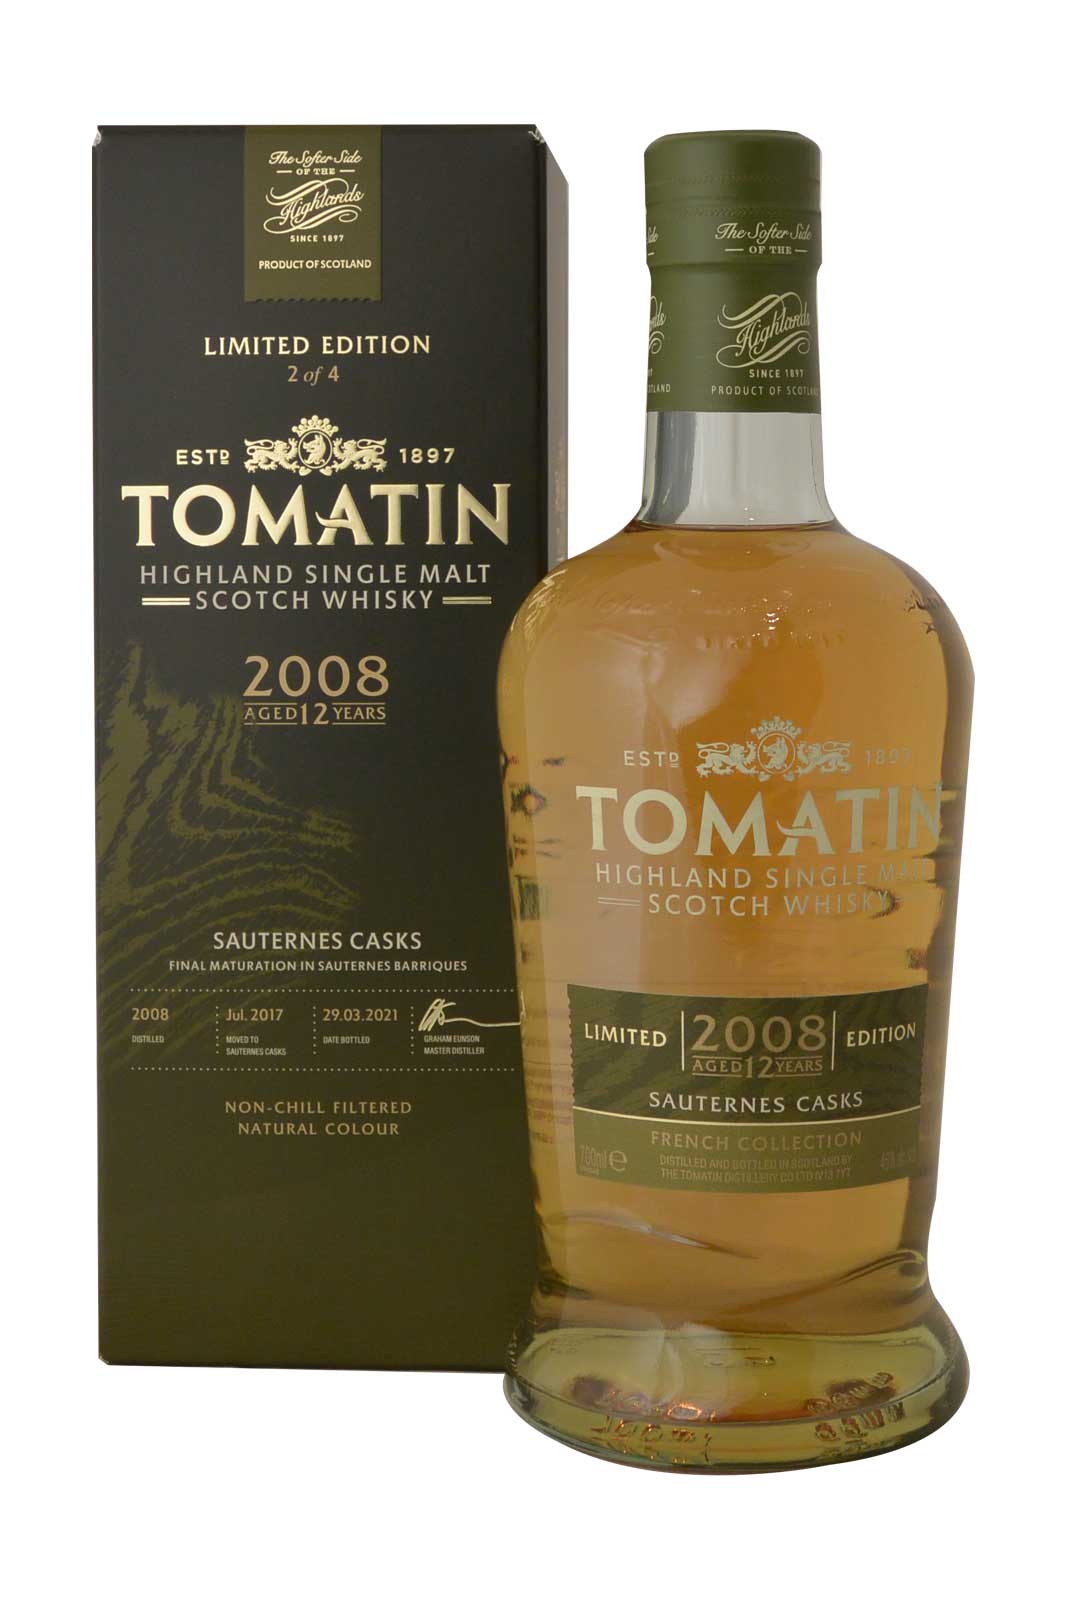 Tomatin 12 Year Old 2008 Sauternes -  French Collection